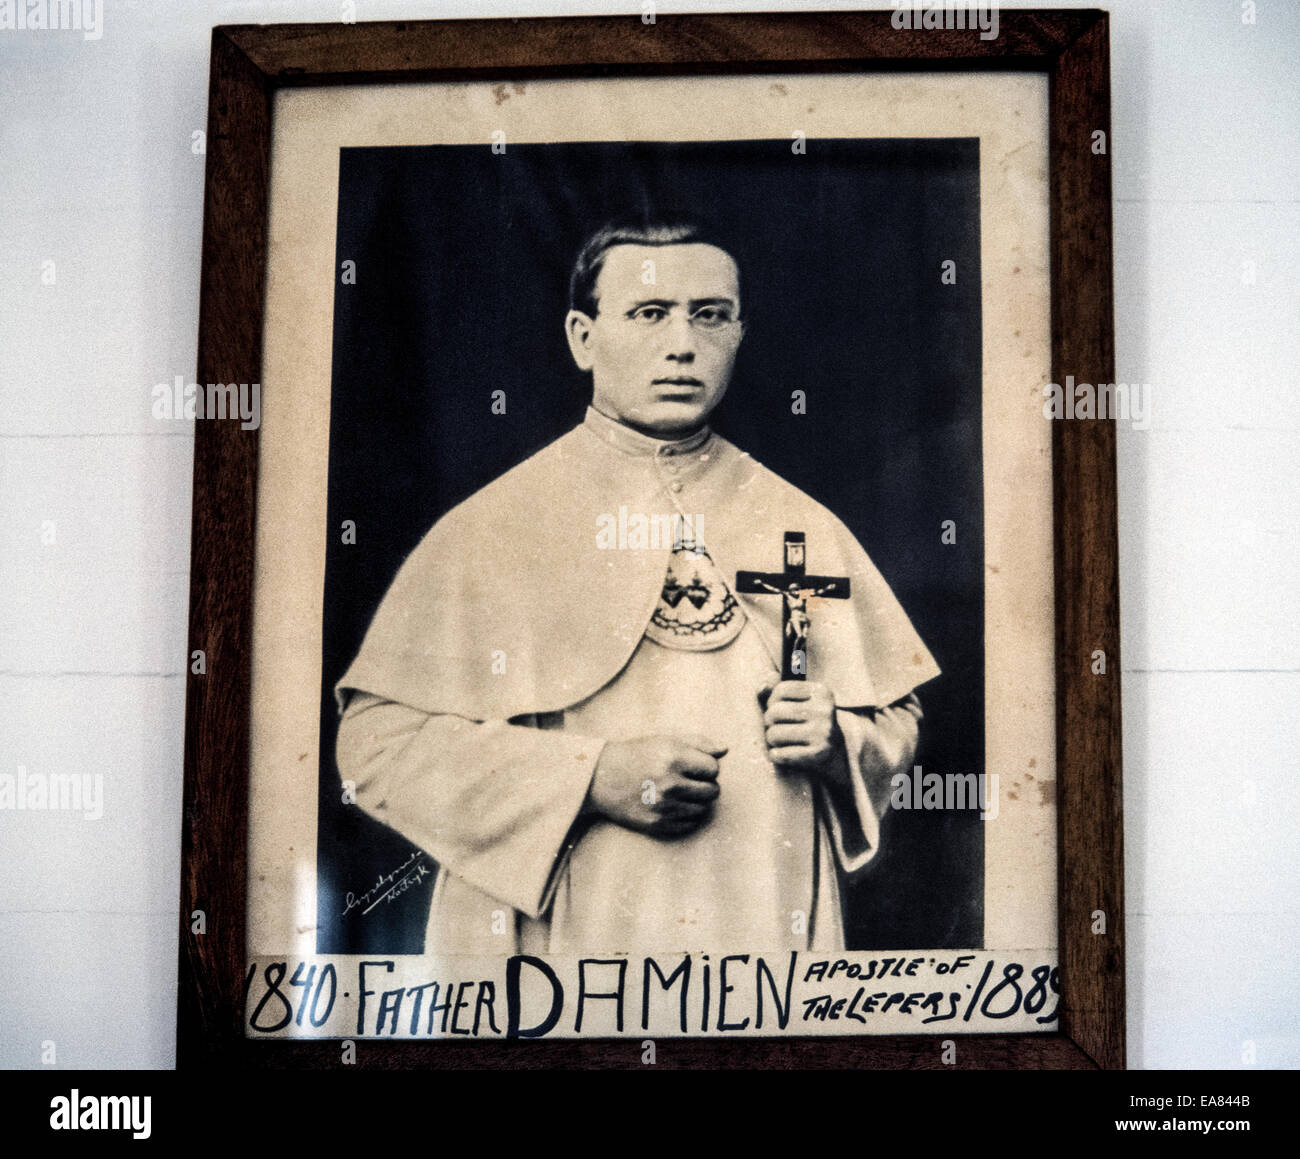 A framed 19th-century photographic portrait of Belgian missionary priest Joseph De Veuster, best known to the world as Father Damien, hangs in St. Joseph's Church that he built while serving the Hawaiian leper colony elsewhere on the island of Molokai, Hawaii, USA. More than 700 patients with leprosy (Hansen's disease) had been isolated there by the time Damien arrived in 1873. He later suffered the same infectious disease and died in the colony in 1889. Father Damien was canonized a saint in the Catholic Church In 2009. His St. Joseph's Church has since been renamed St. Damien's Church. Stock Photo